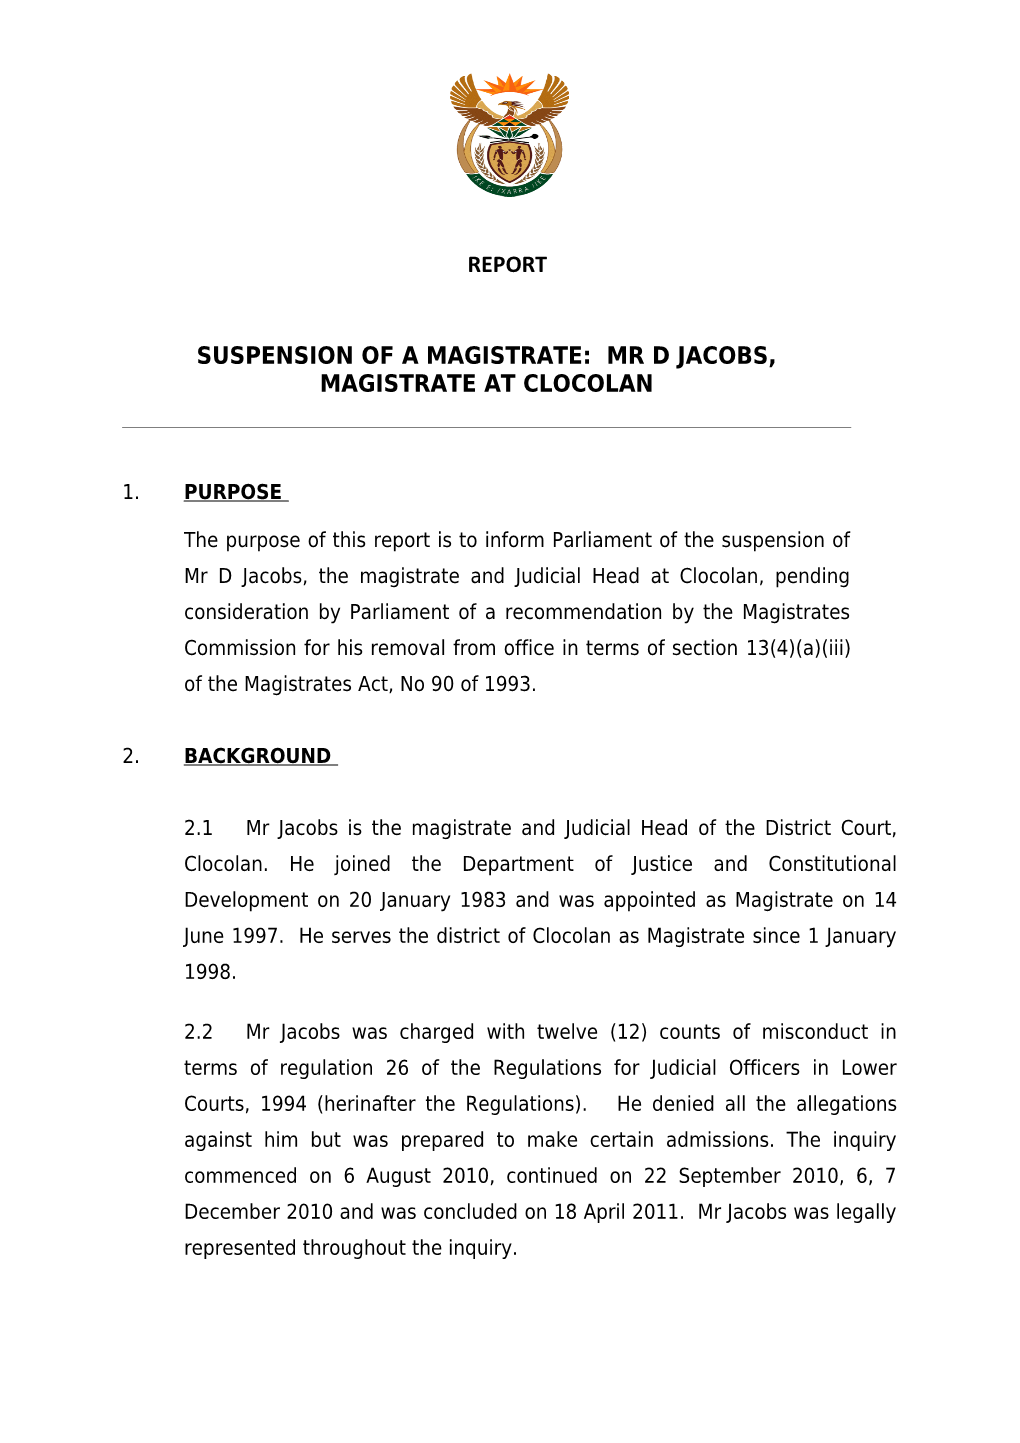 Suspension of a Magistrate: Mr D Jacobs, Magistrate at Clocolan